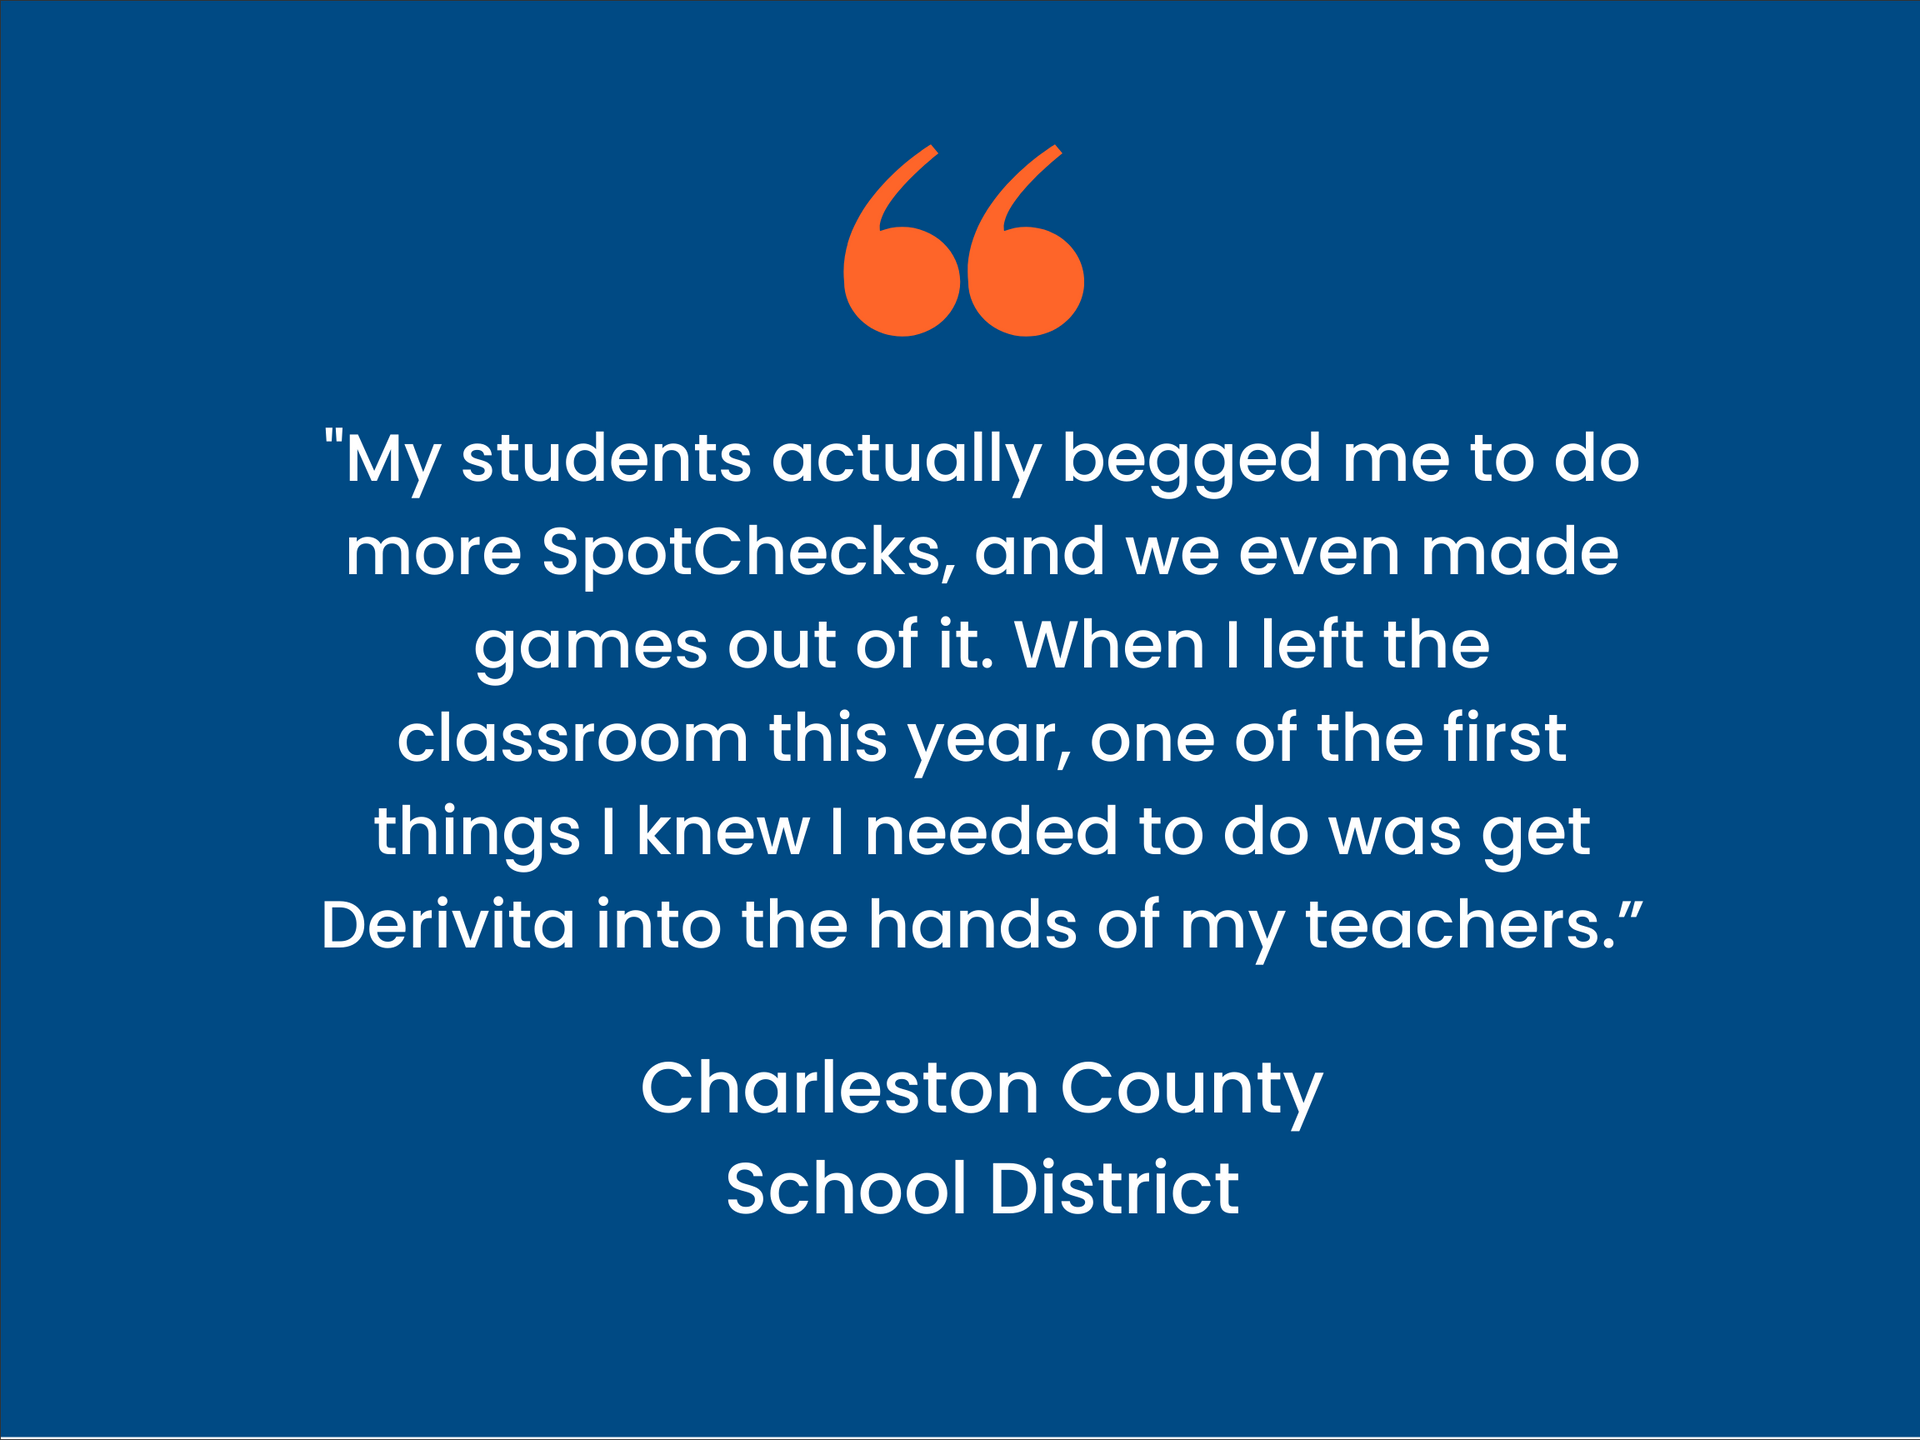 Quote Card - Charleston County School District says "My students actually begged me to do more SpotChecks, and we even made games out of it. When I left the classroom this year, one of the first things I knew I needed to do was get Derivita into the hands of my teachers."